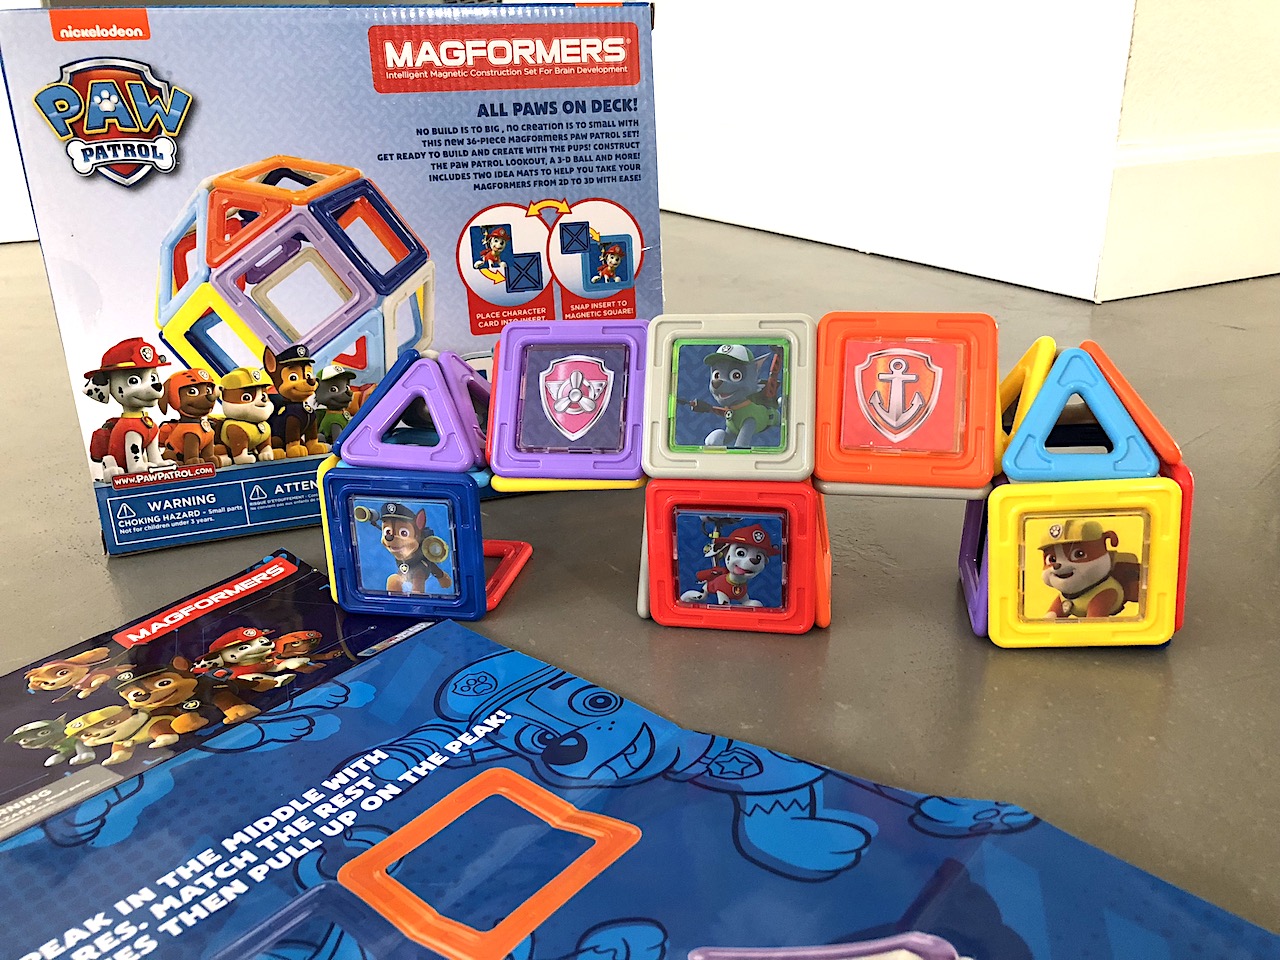 Paw Patrol Magformers - Best STEM toy for children of all ages #Magformers #STEM #STEMToys #BestToy #AwardWinning